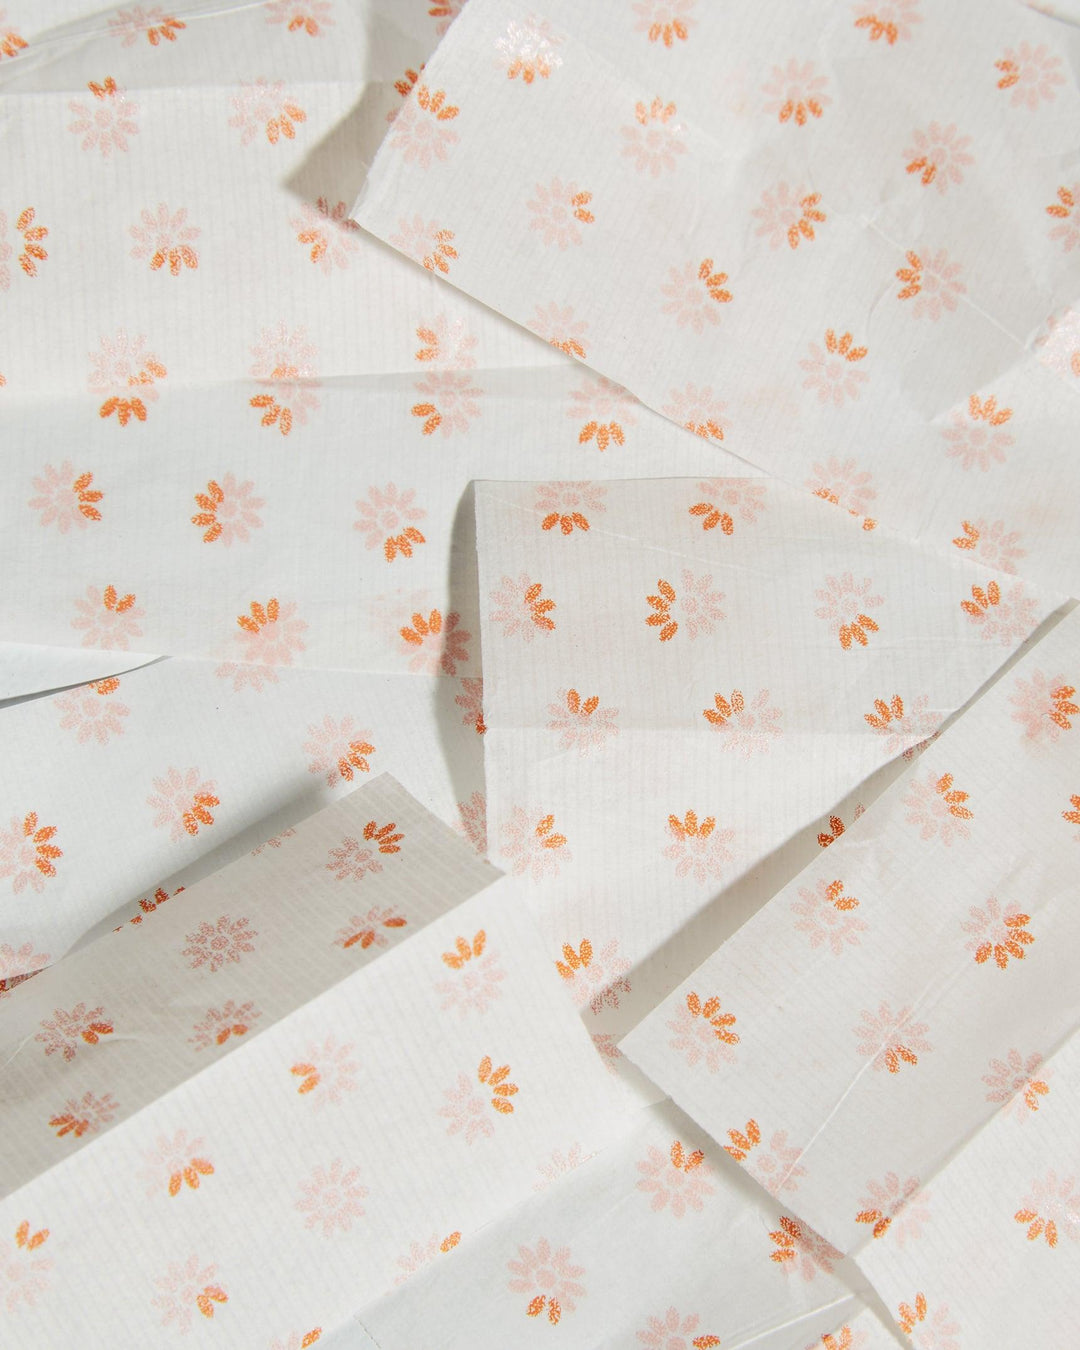 orange flower printed joint rolling papers